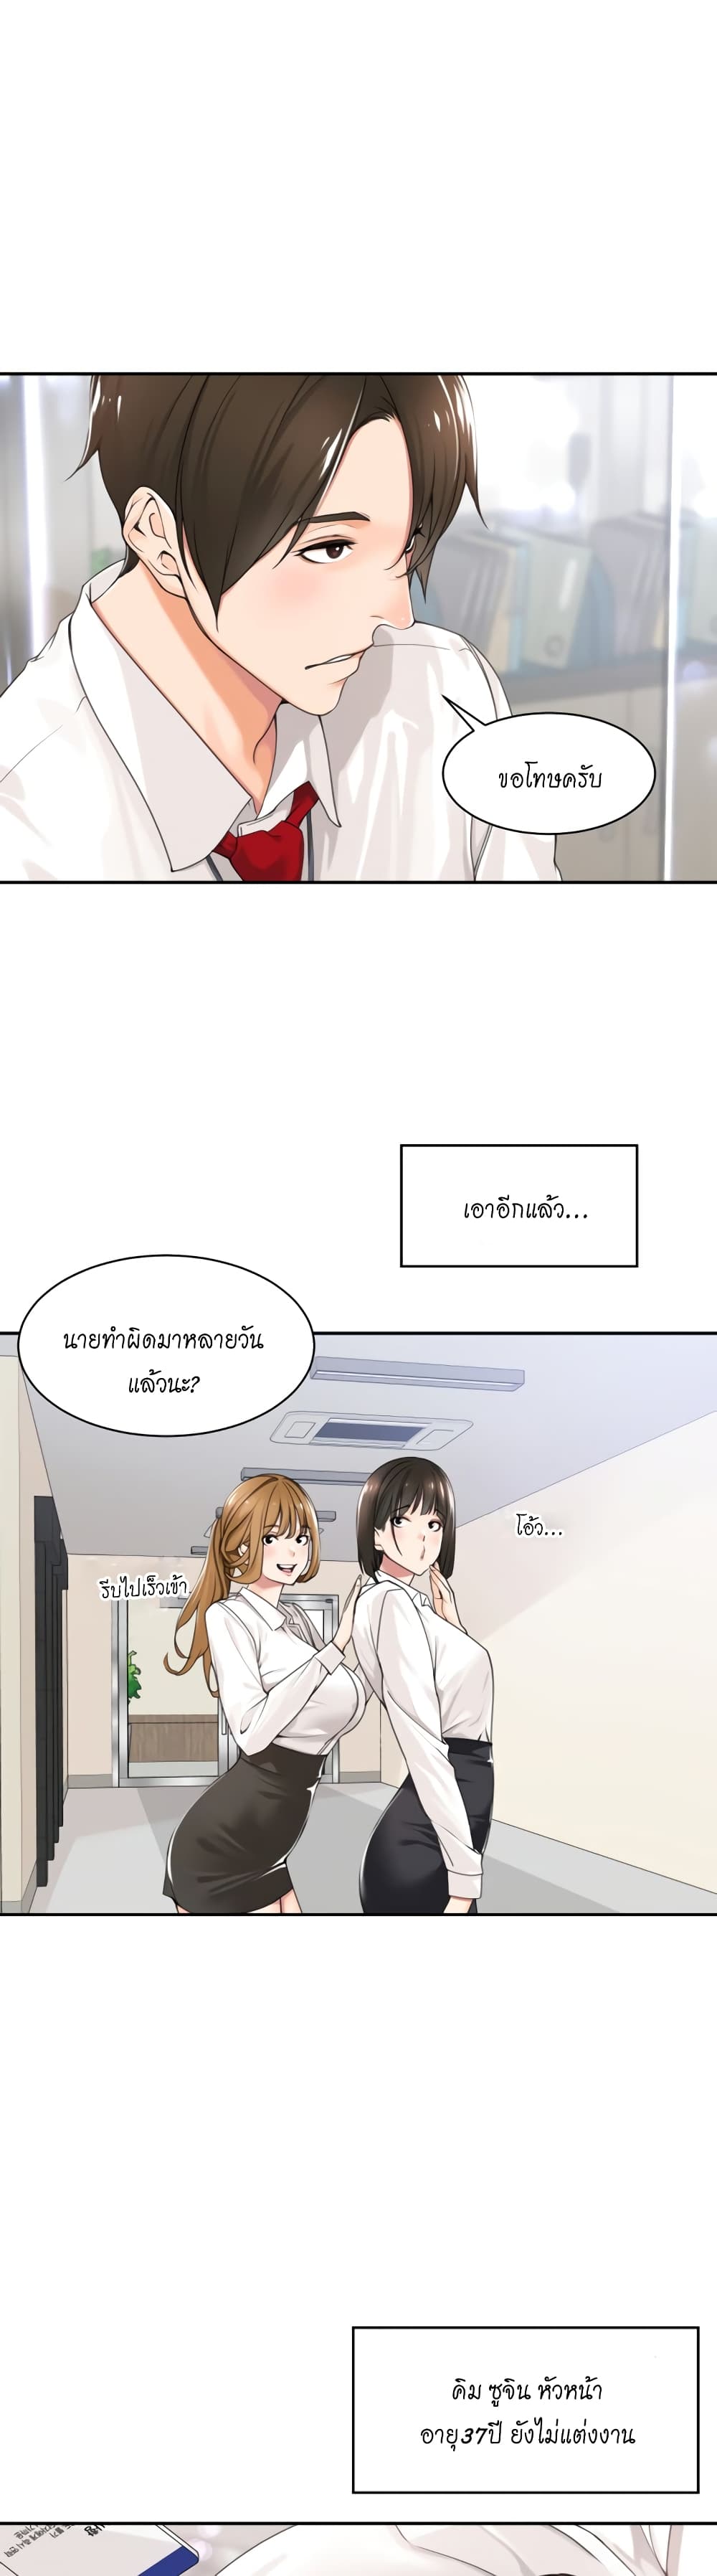 Manager, Please Scold Me ตอนที่ 1 ภาพ 6